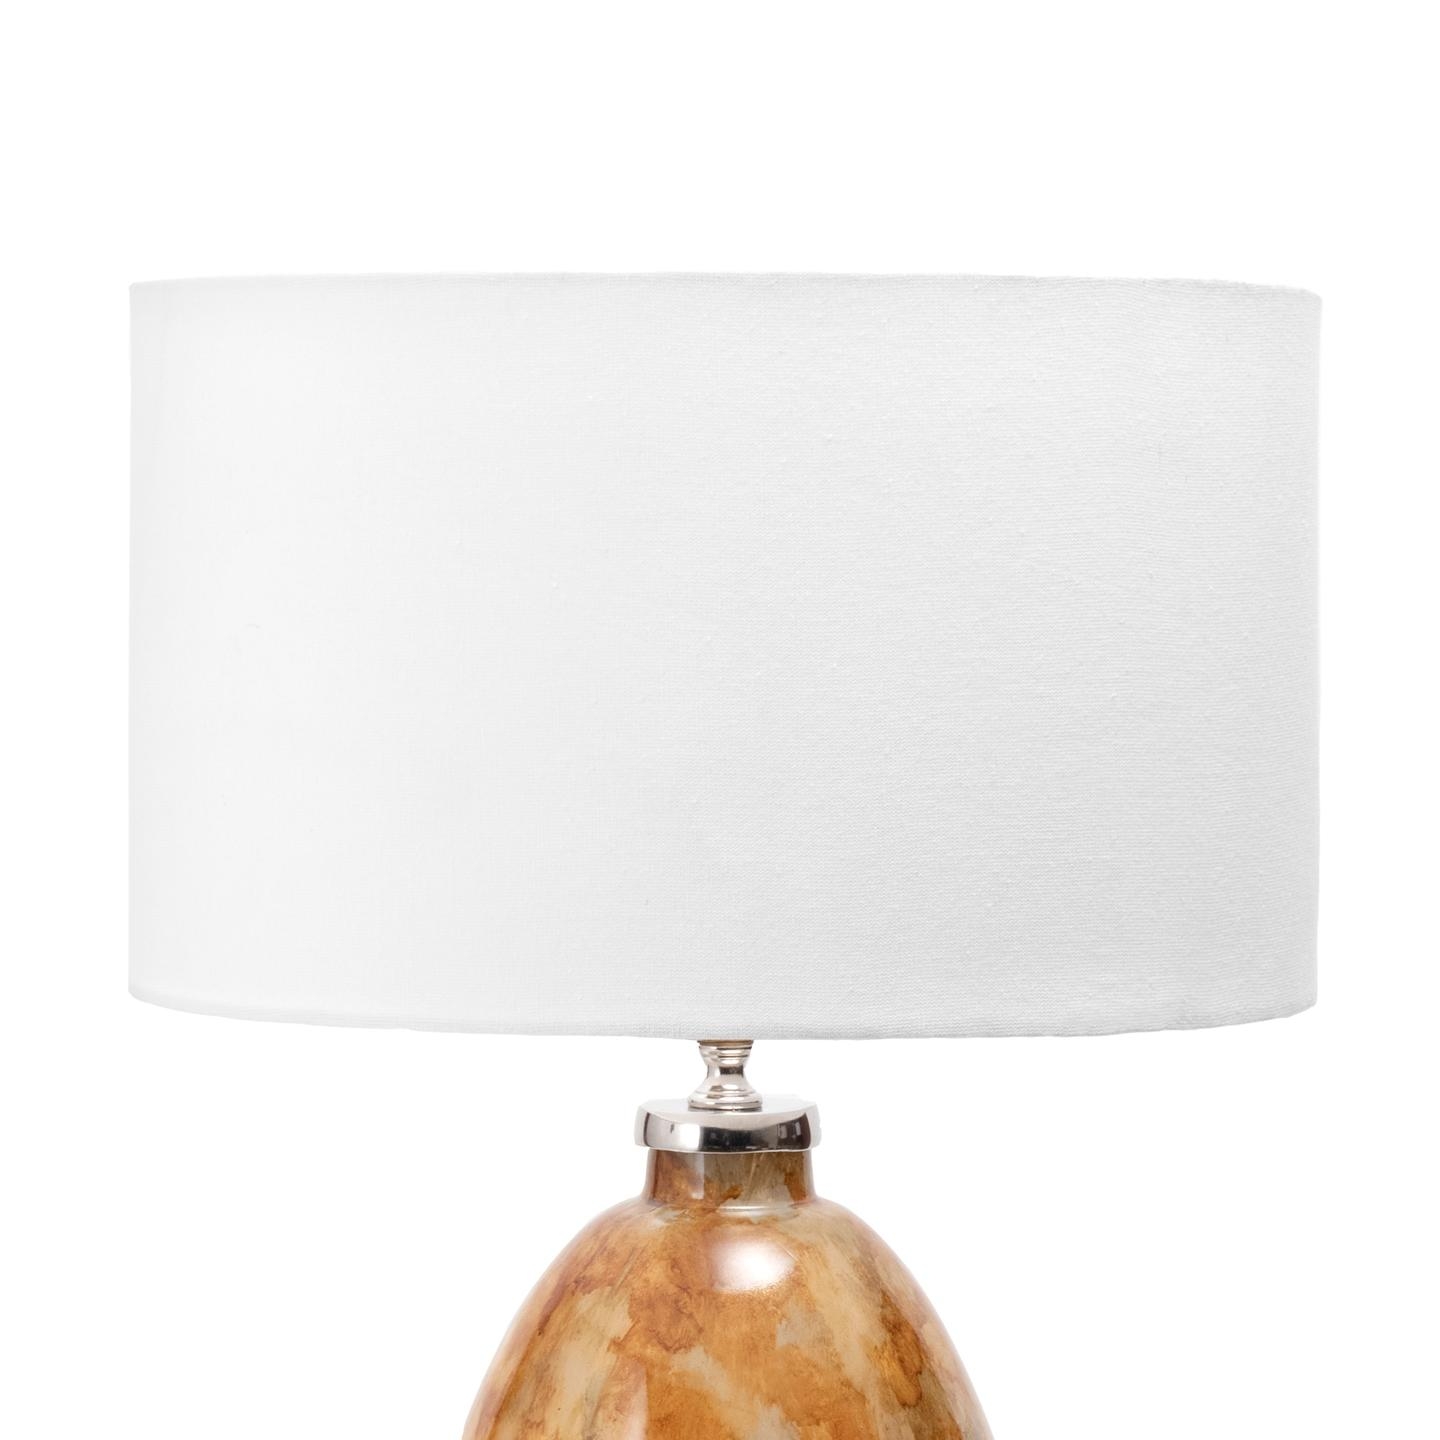  Clifton 22" Glass Table Lamp - Image 4